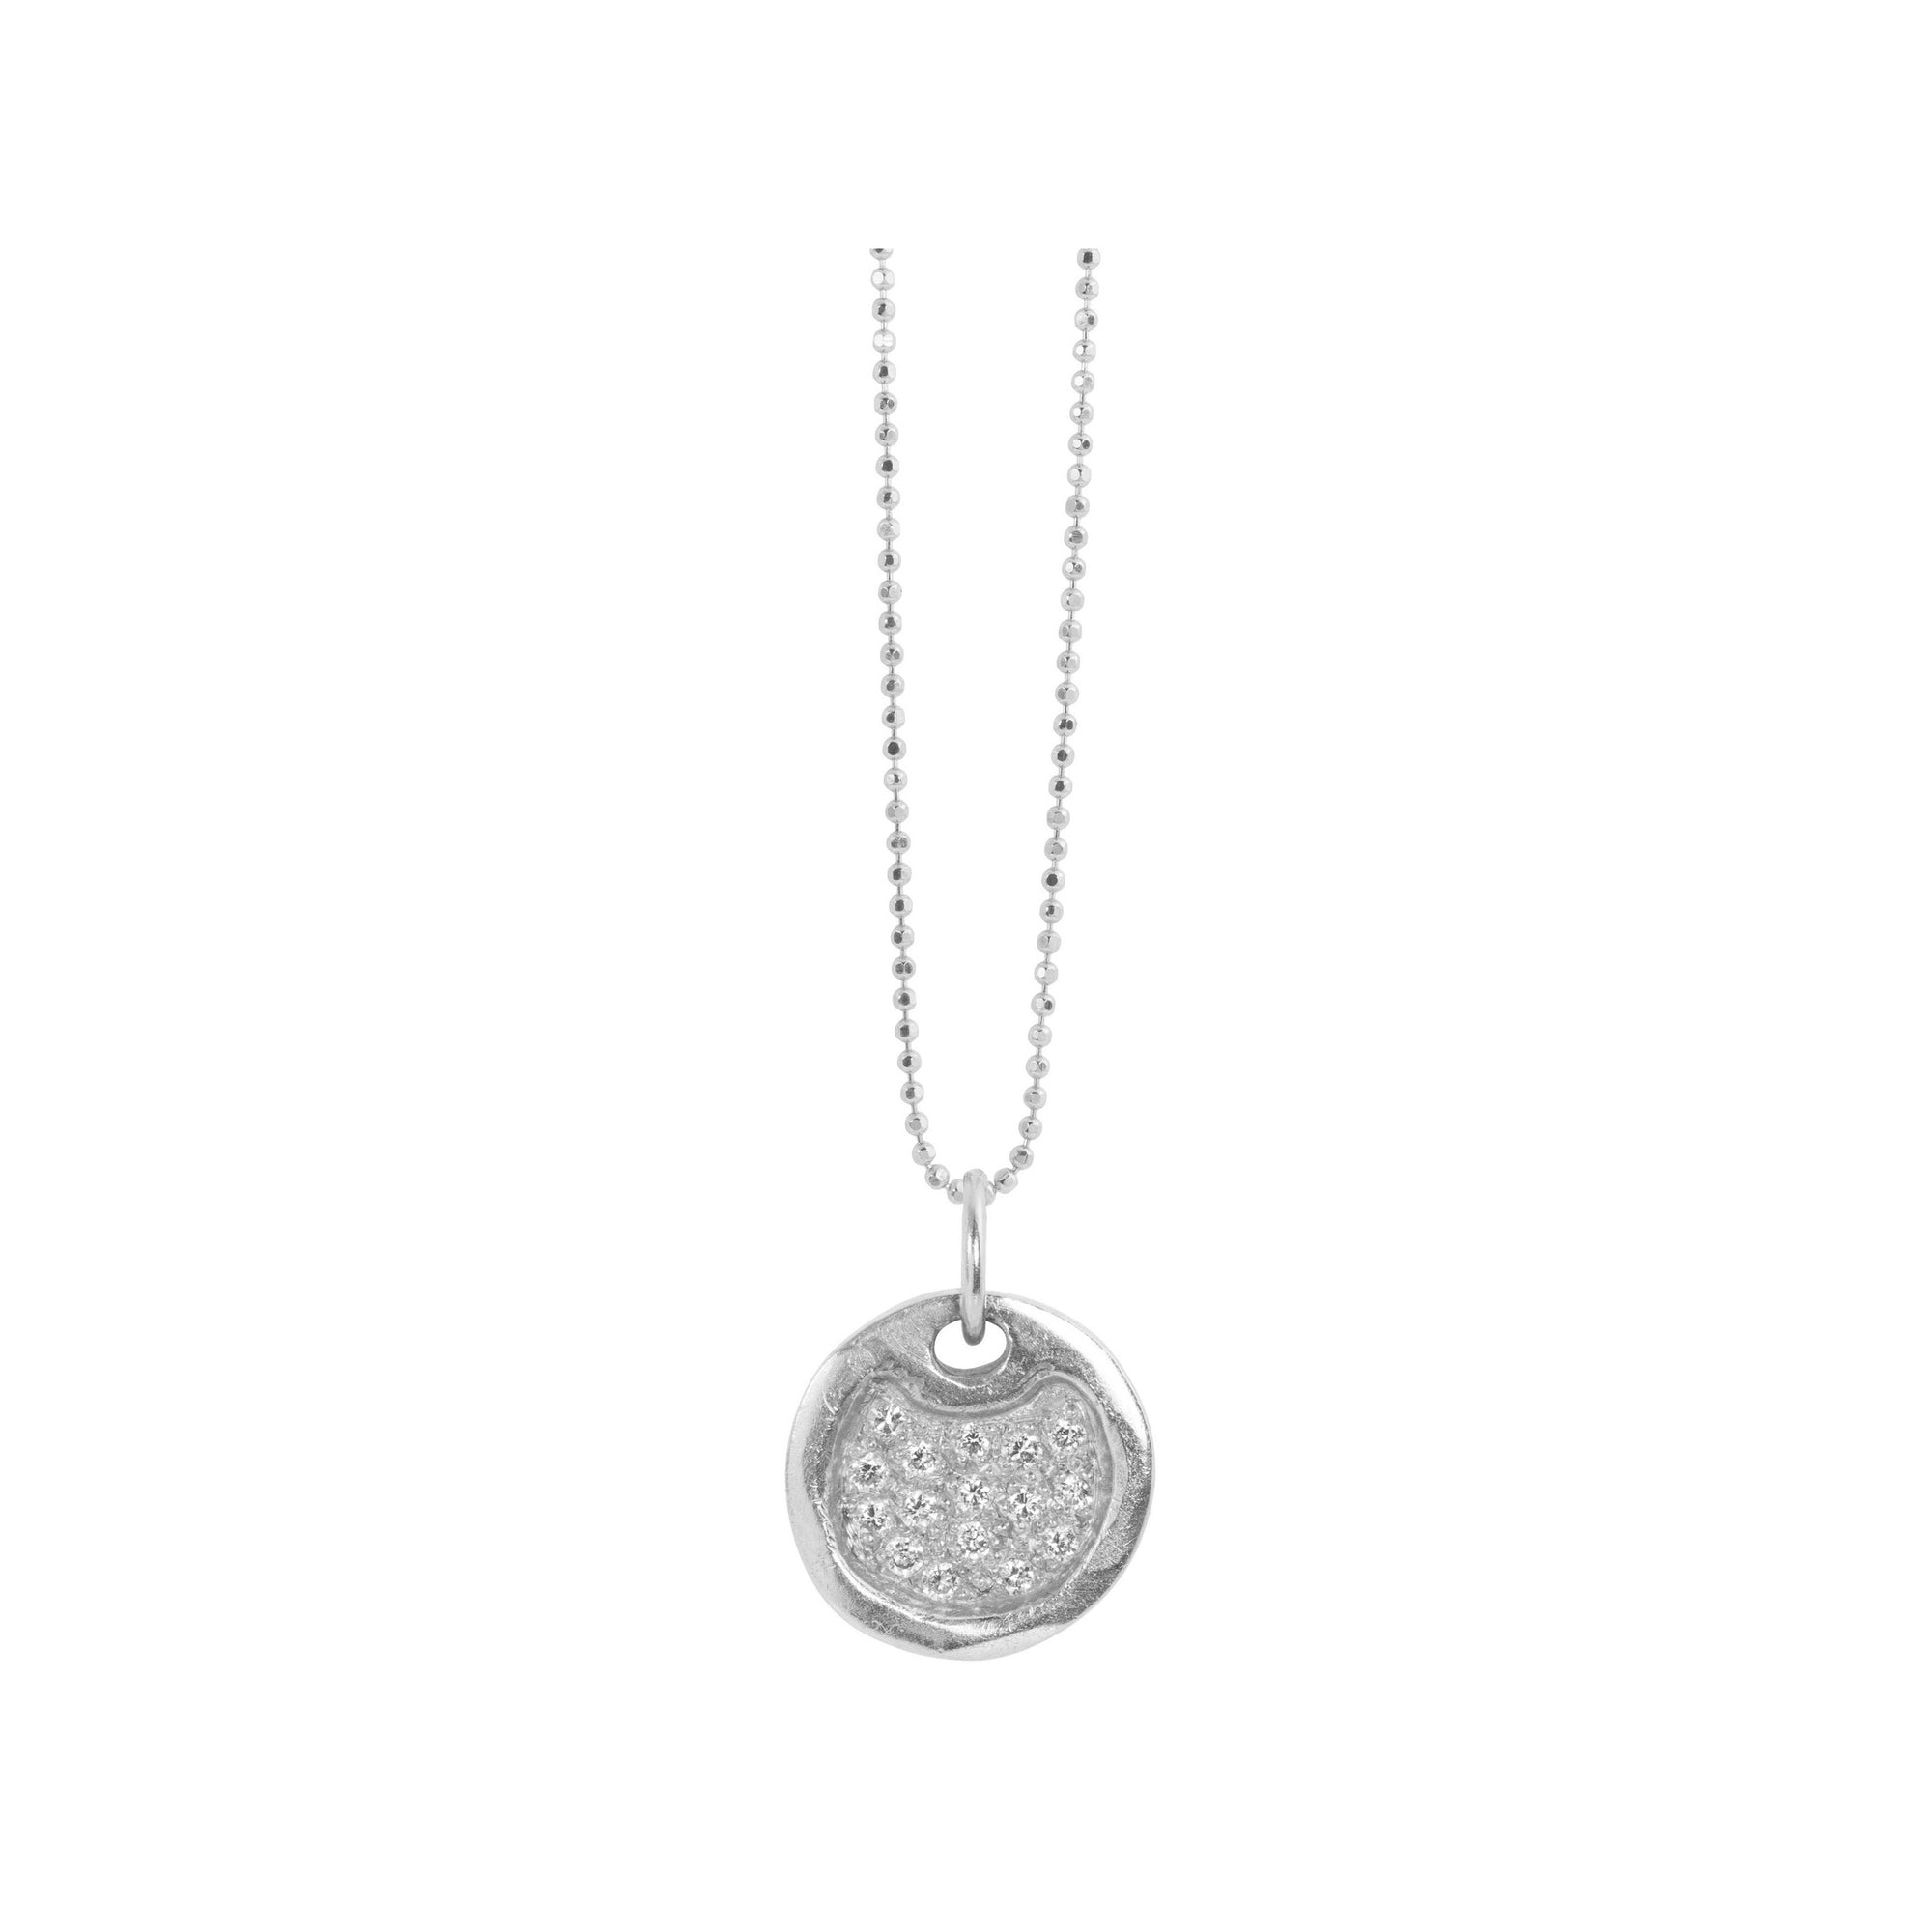 14k white gold baby DENA round dog tag with scattered diamonds